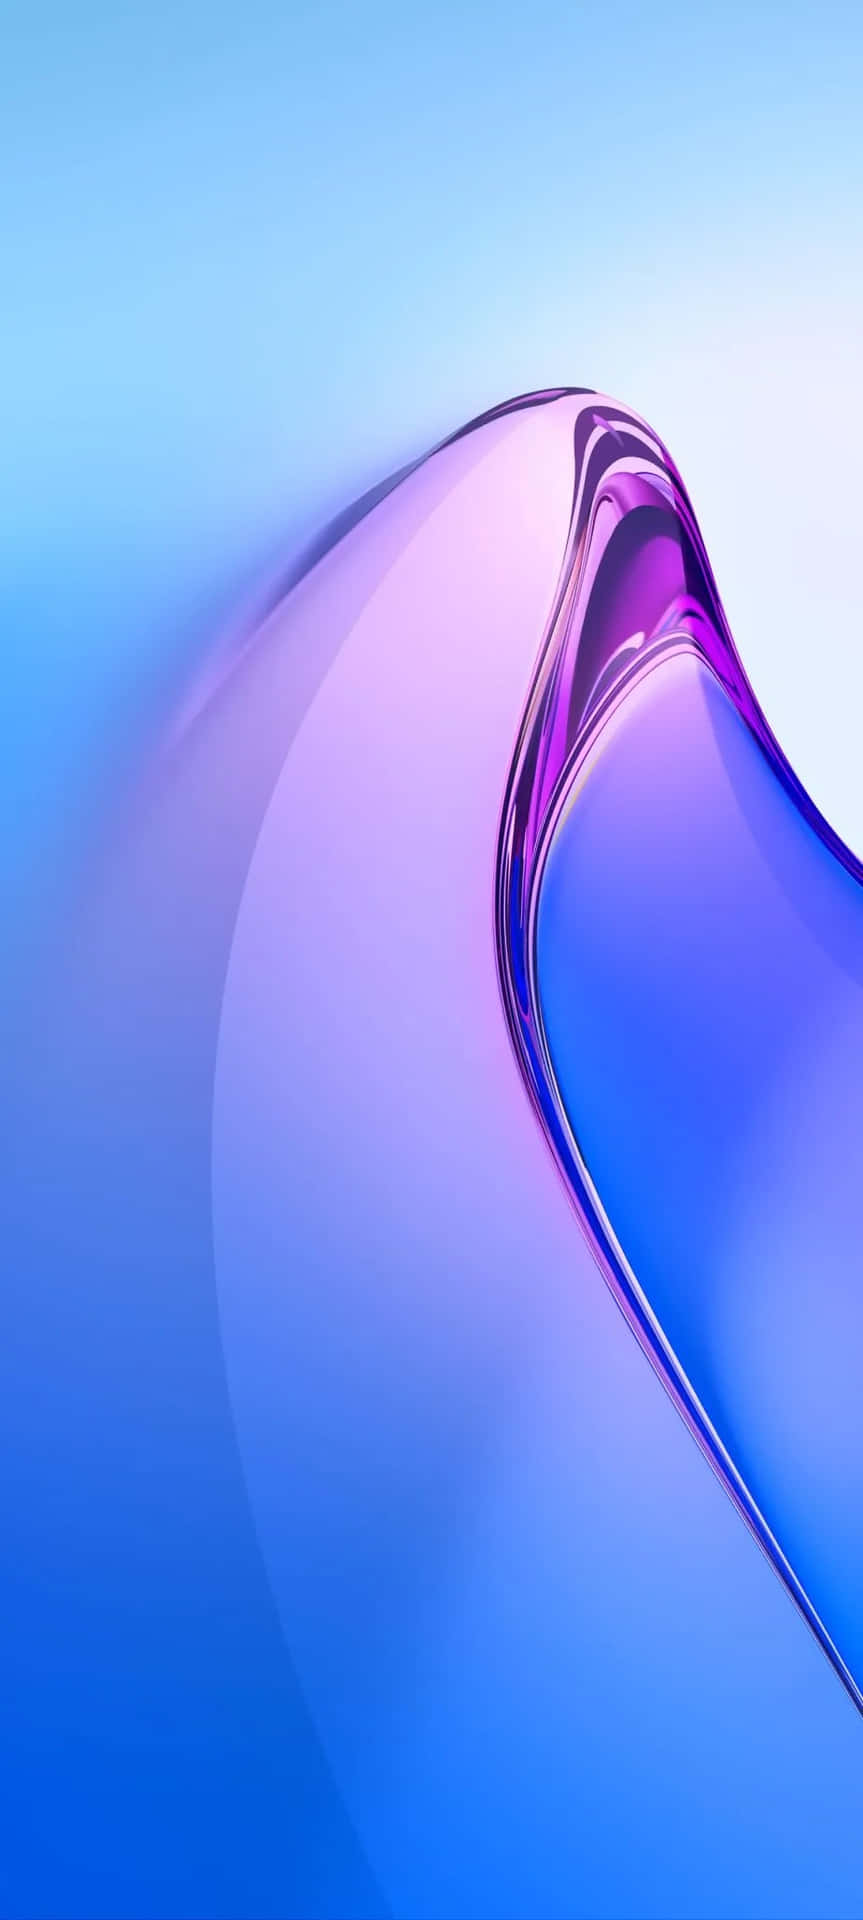 A Blue And Purple Curved Glass Phone